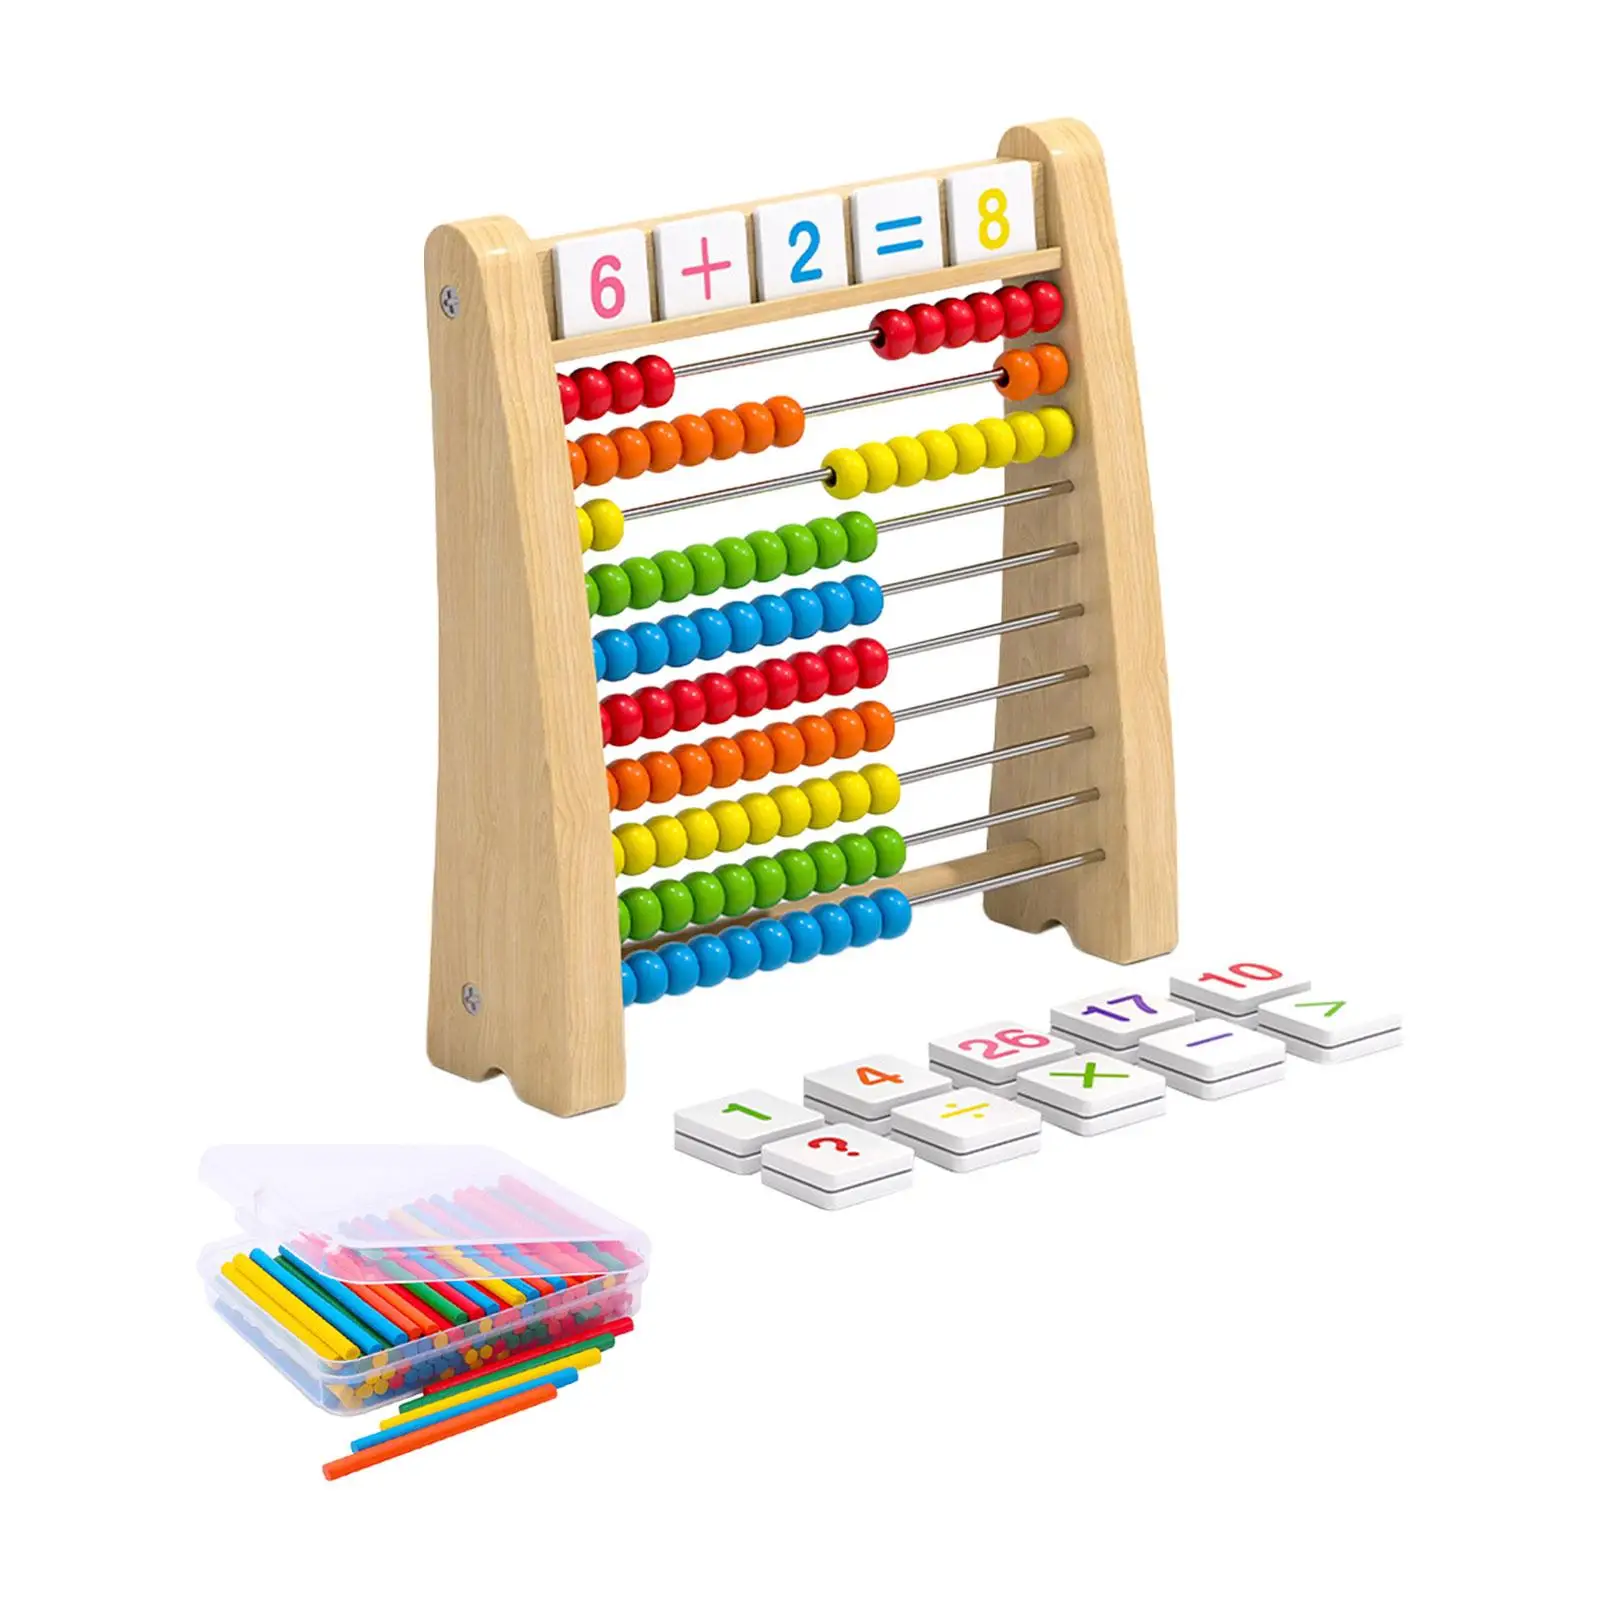 Wooden Abacus Ten Frame Set Educational Counting Toy for Elementary Children